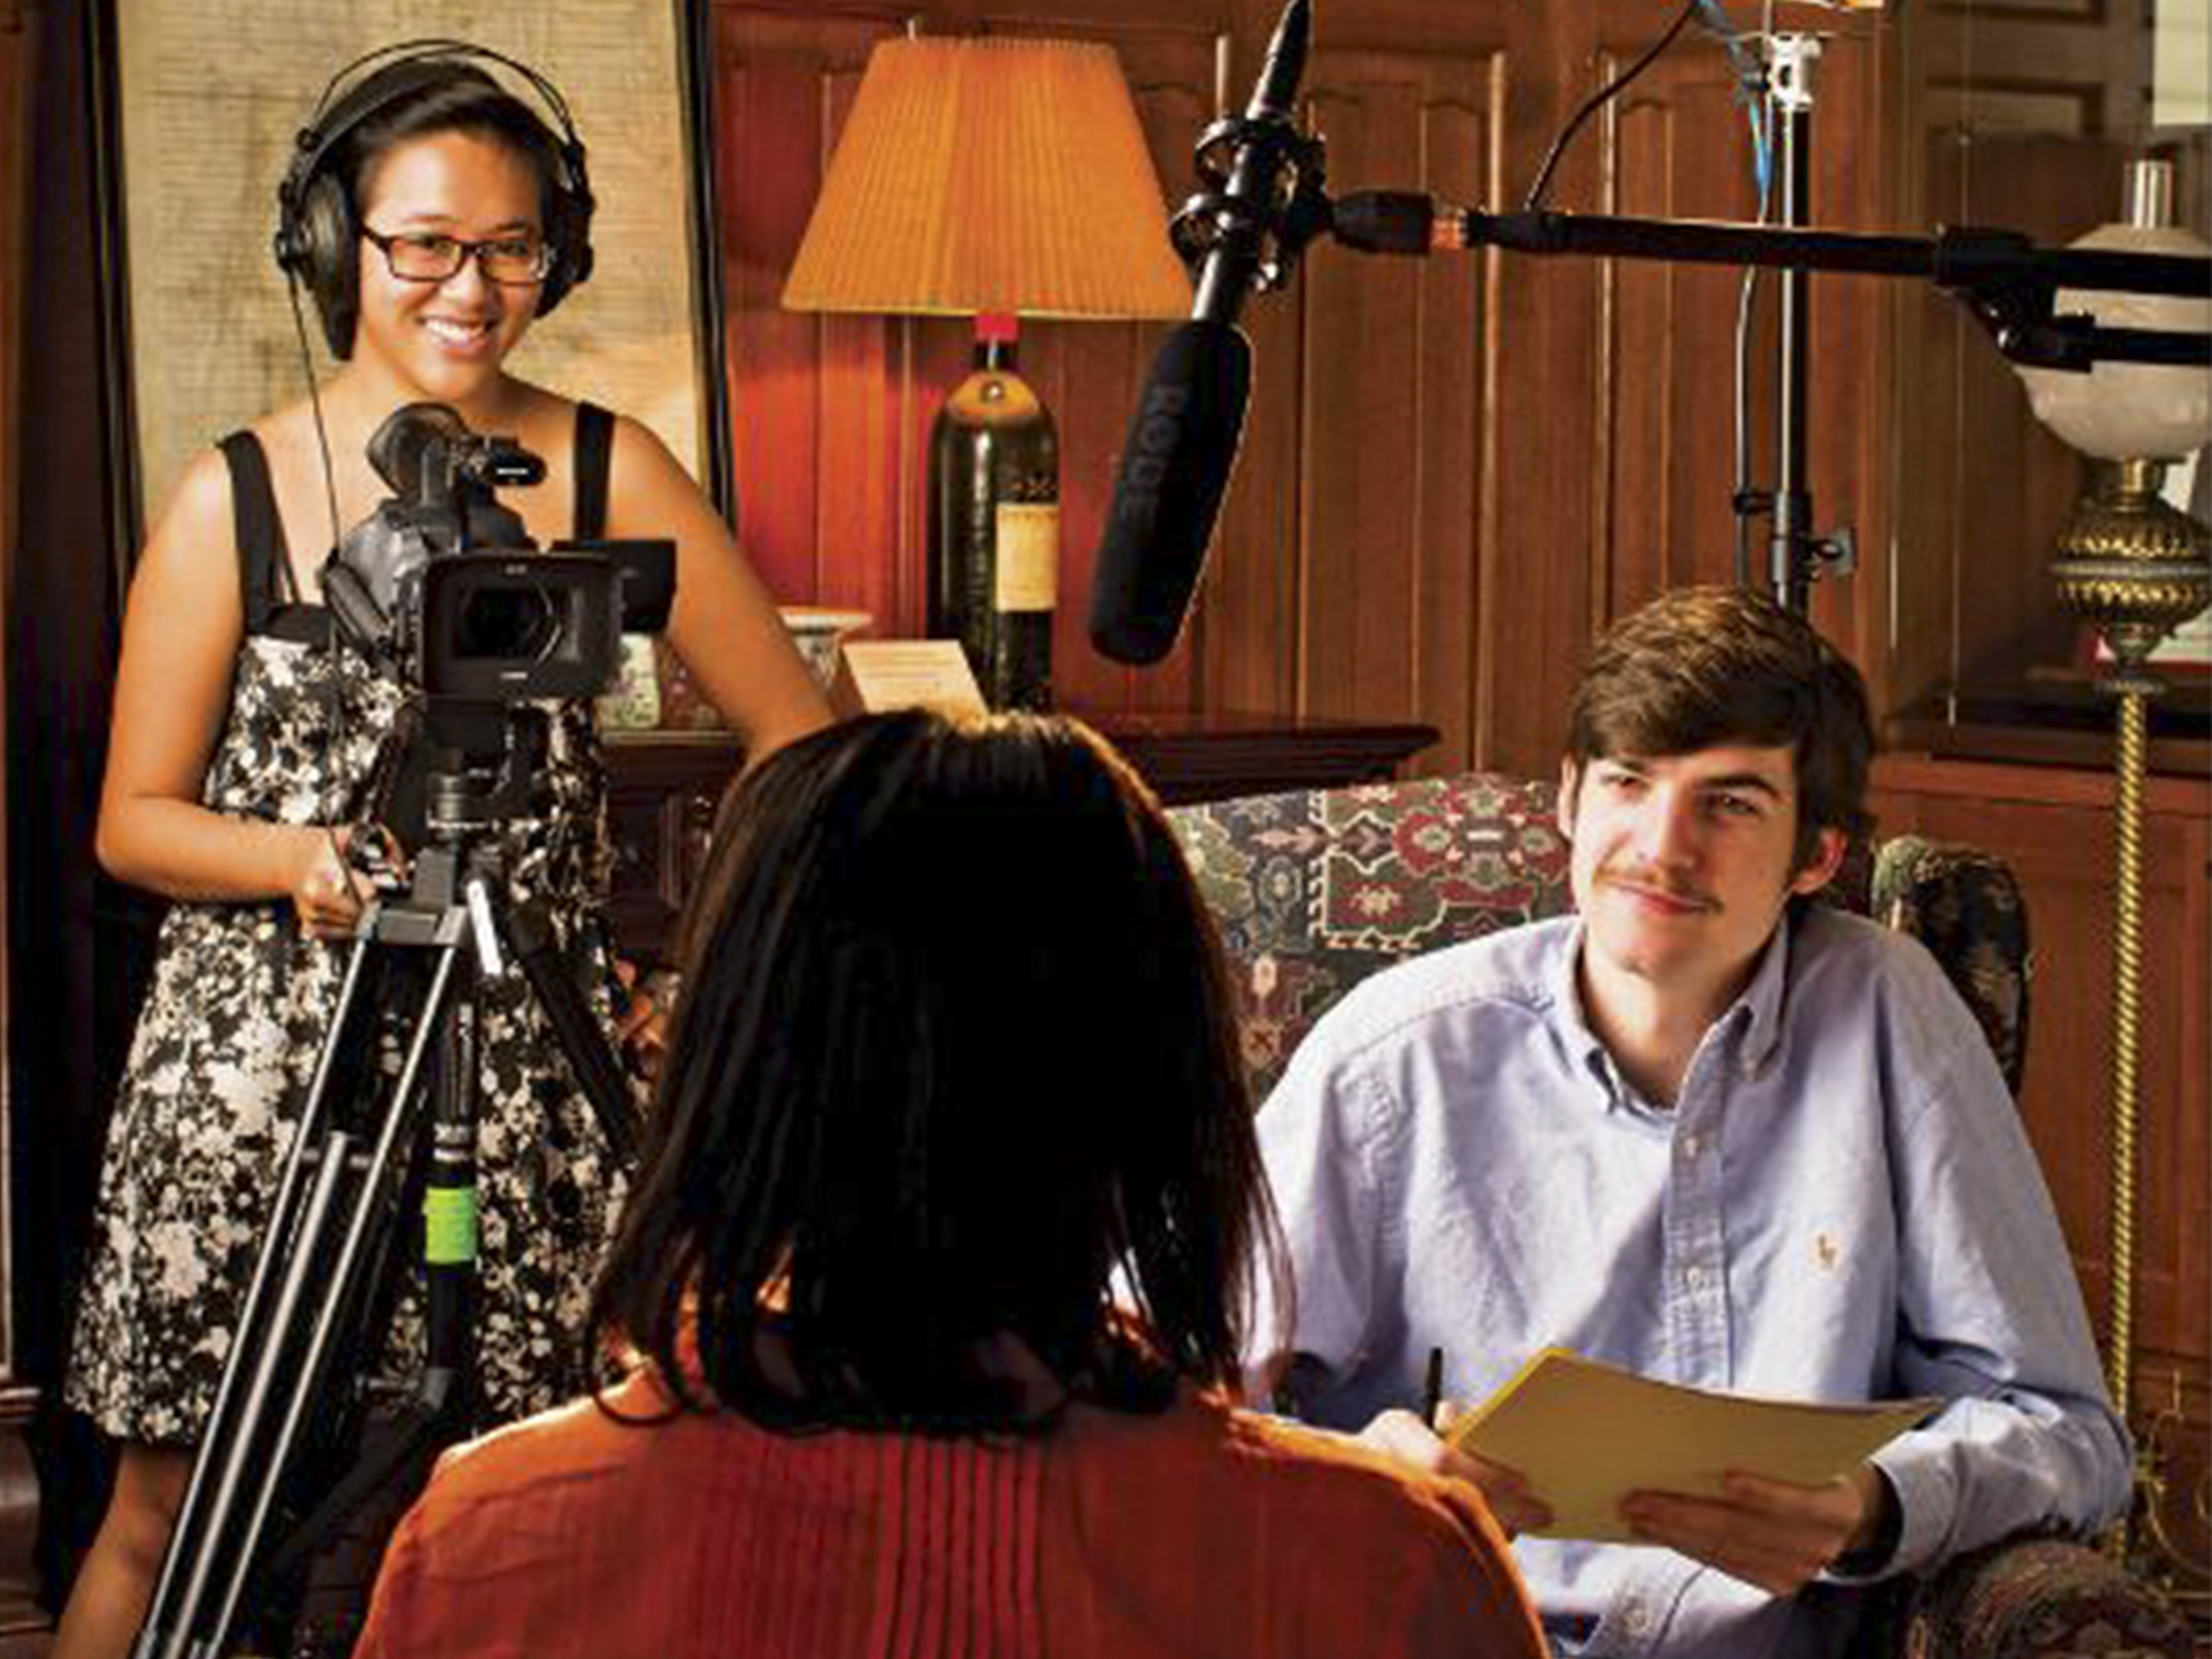 A man and woman interview a subject on camera.